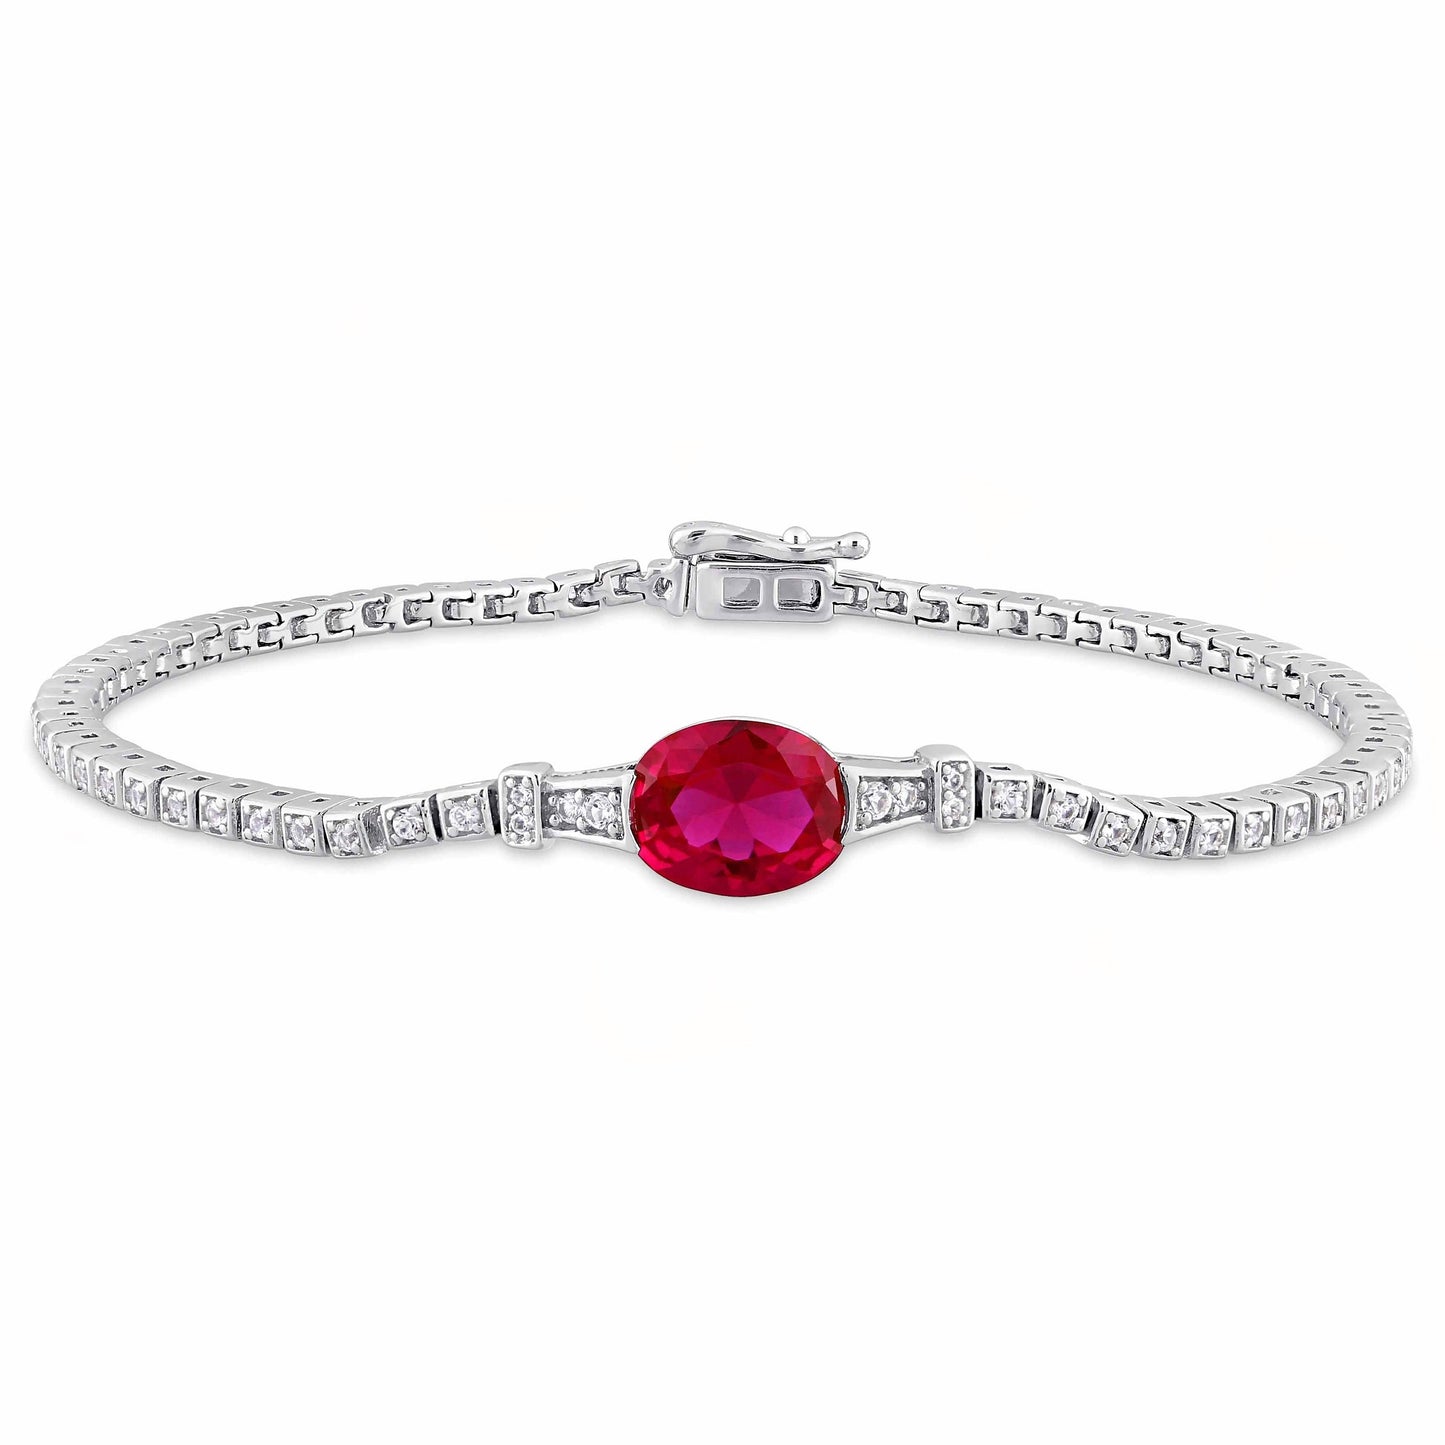 Oval Ruby Diamond Tennise Bracelet In Sterling Silver 925 With 10kt White Gold Plated, Cz Tennis Necklace Sterling 925,Wedding Bracelet,Gift